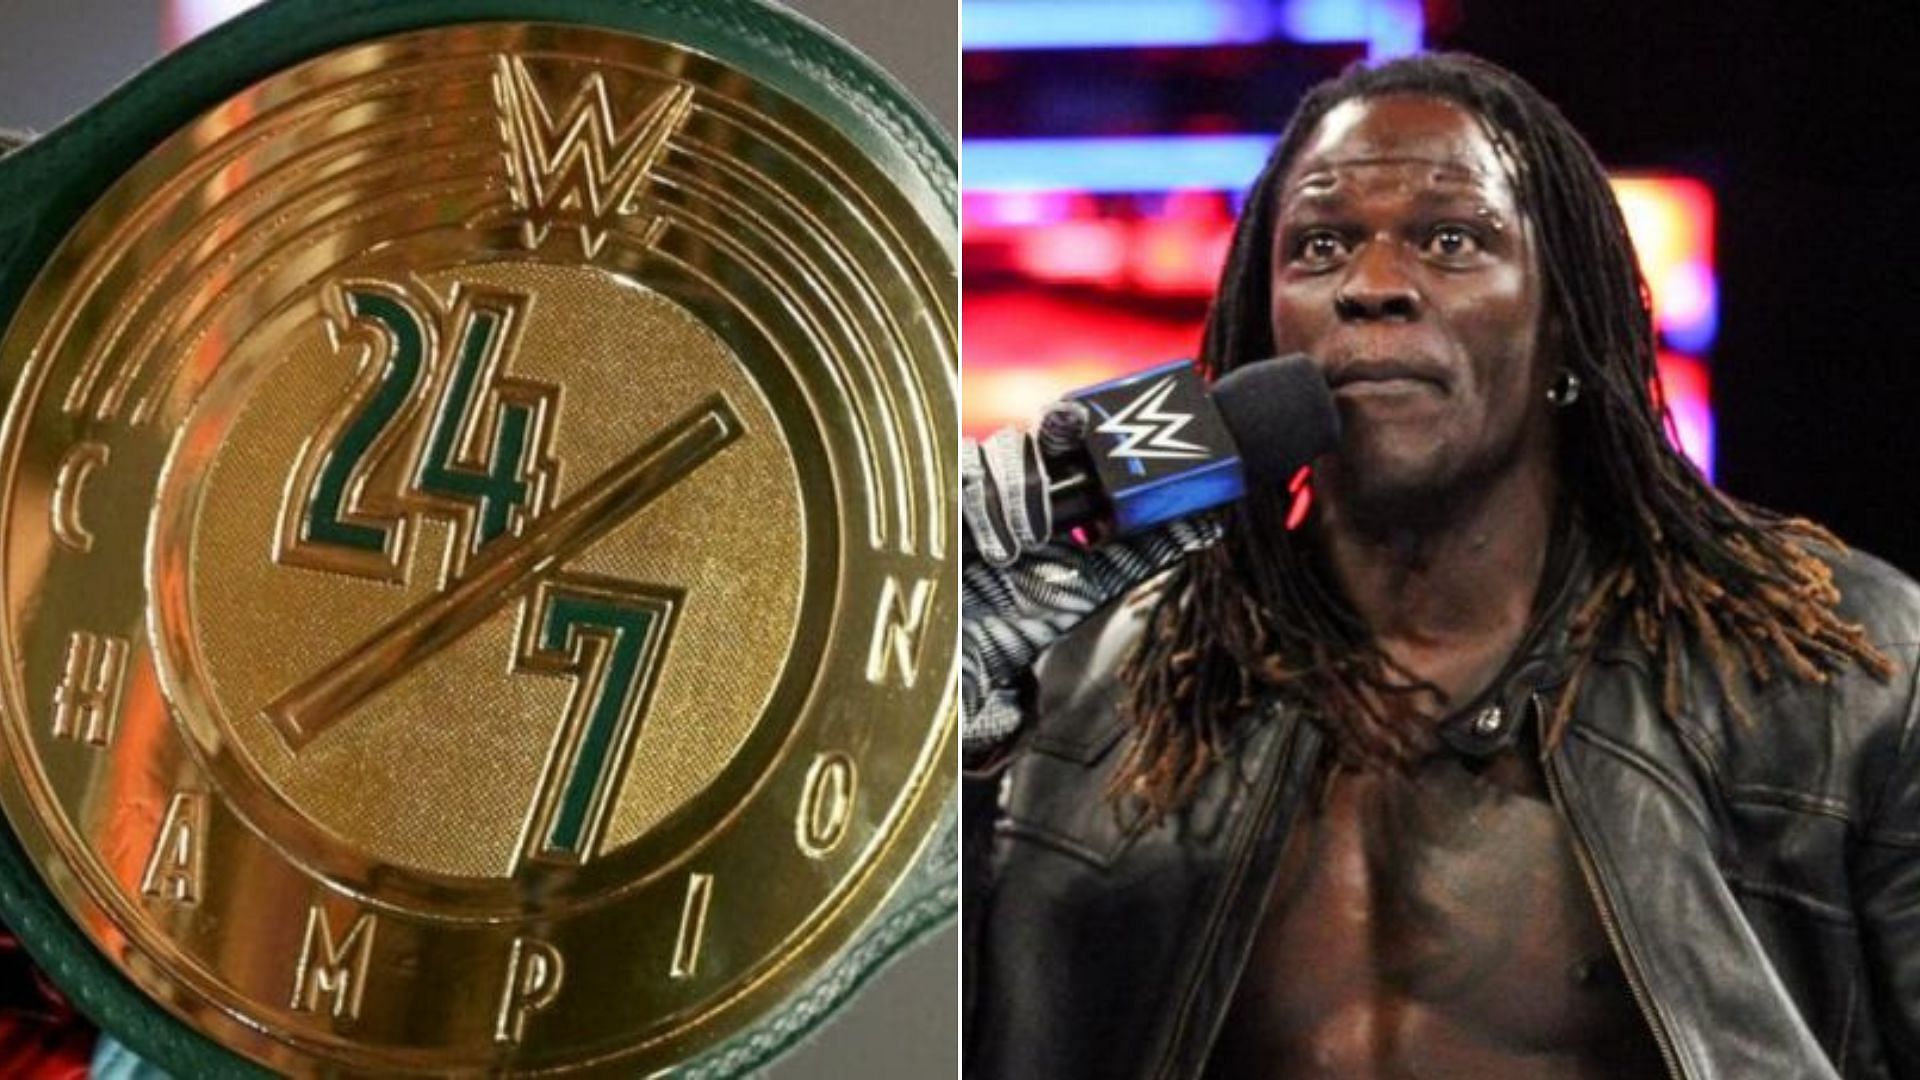 24/7 Title belt (left) R-Truth (right)